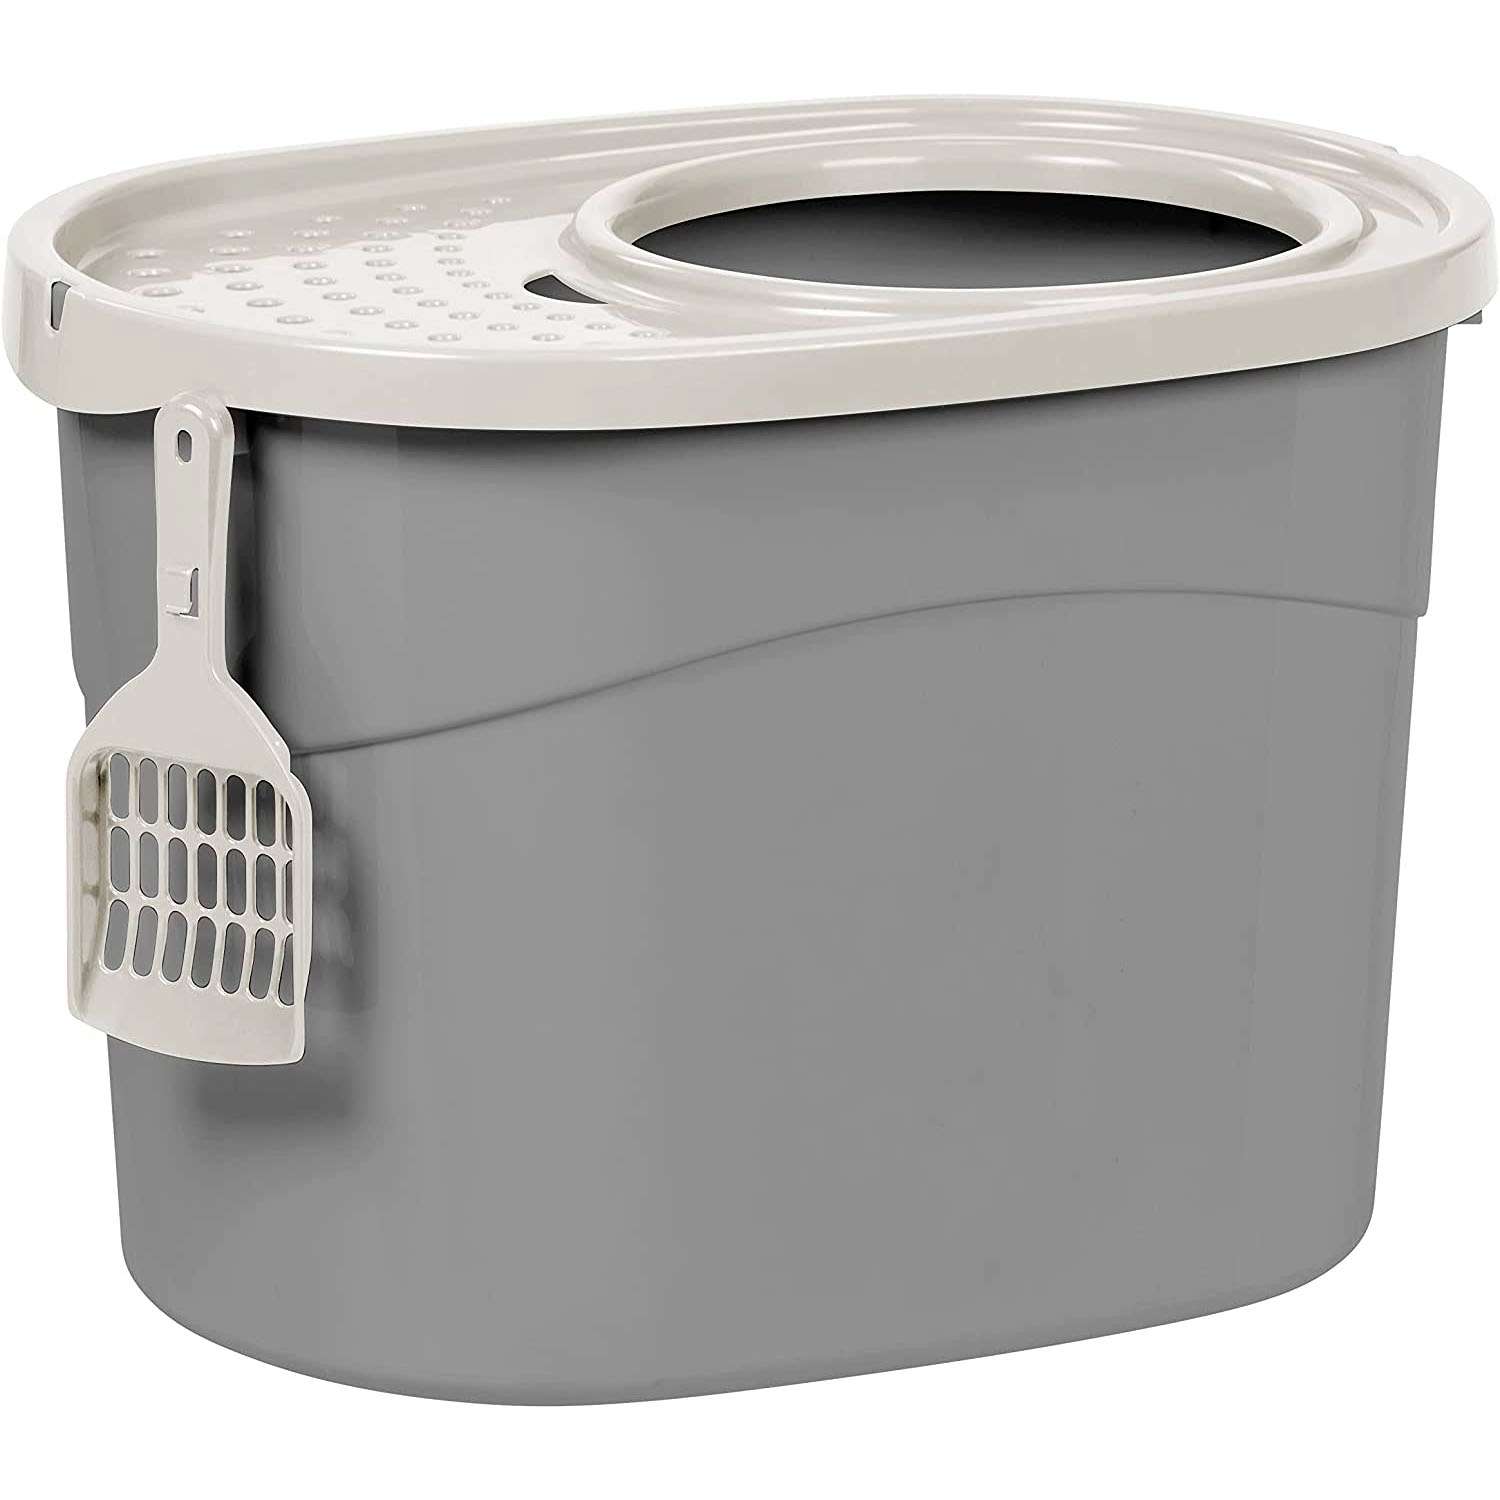 RIS USA Oval Top Entry Cat Litter Box